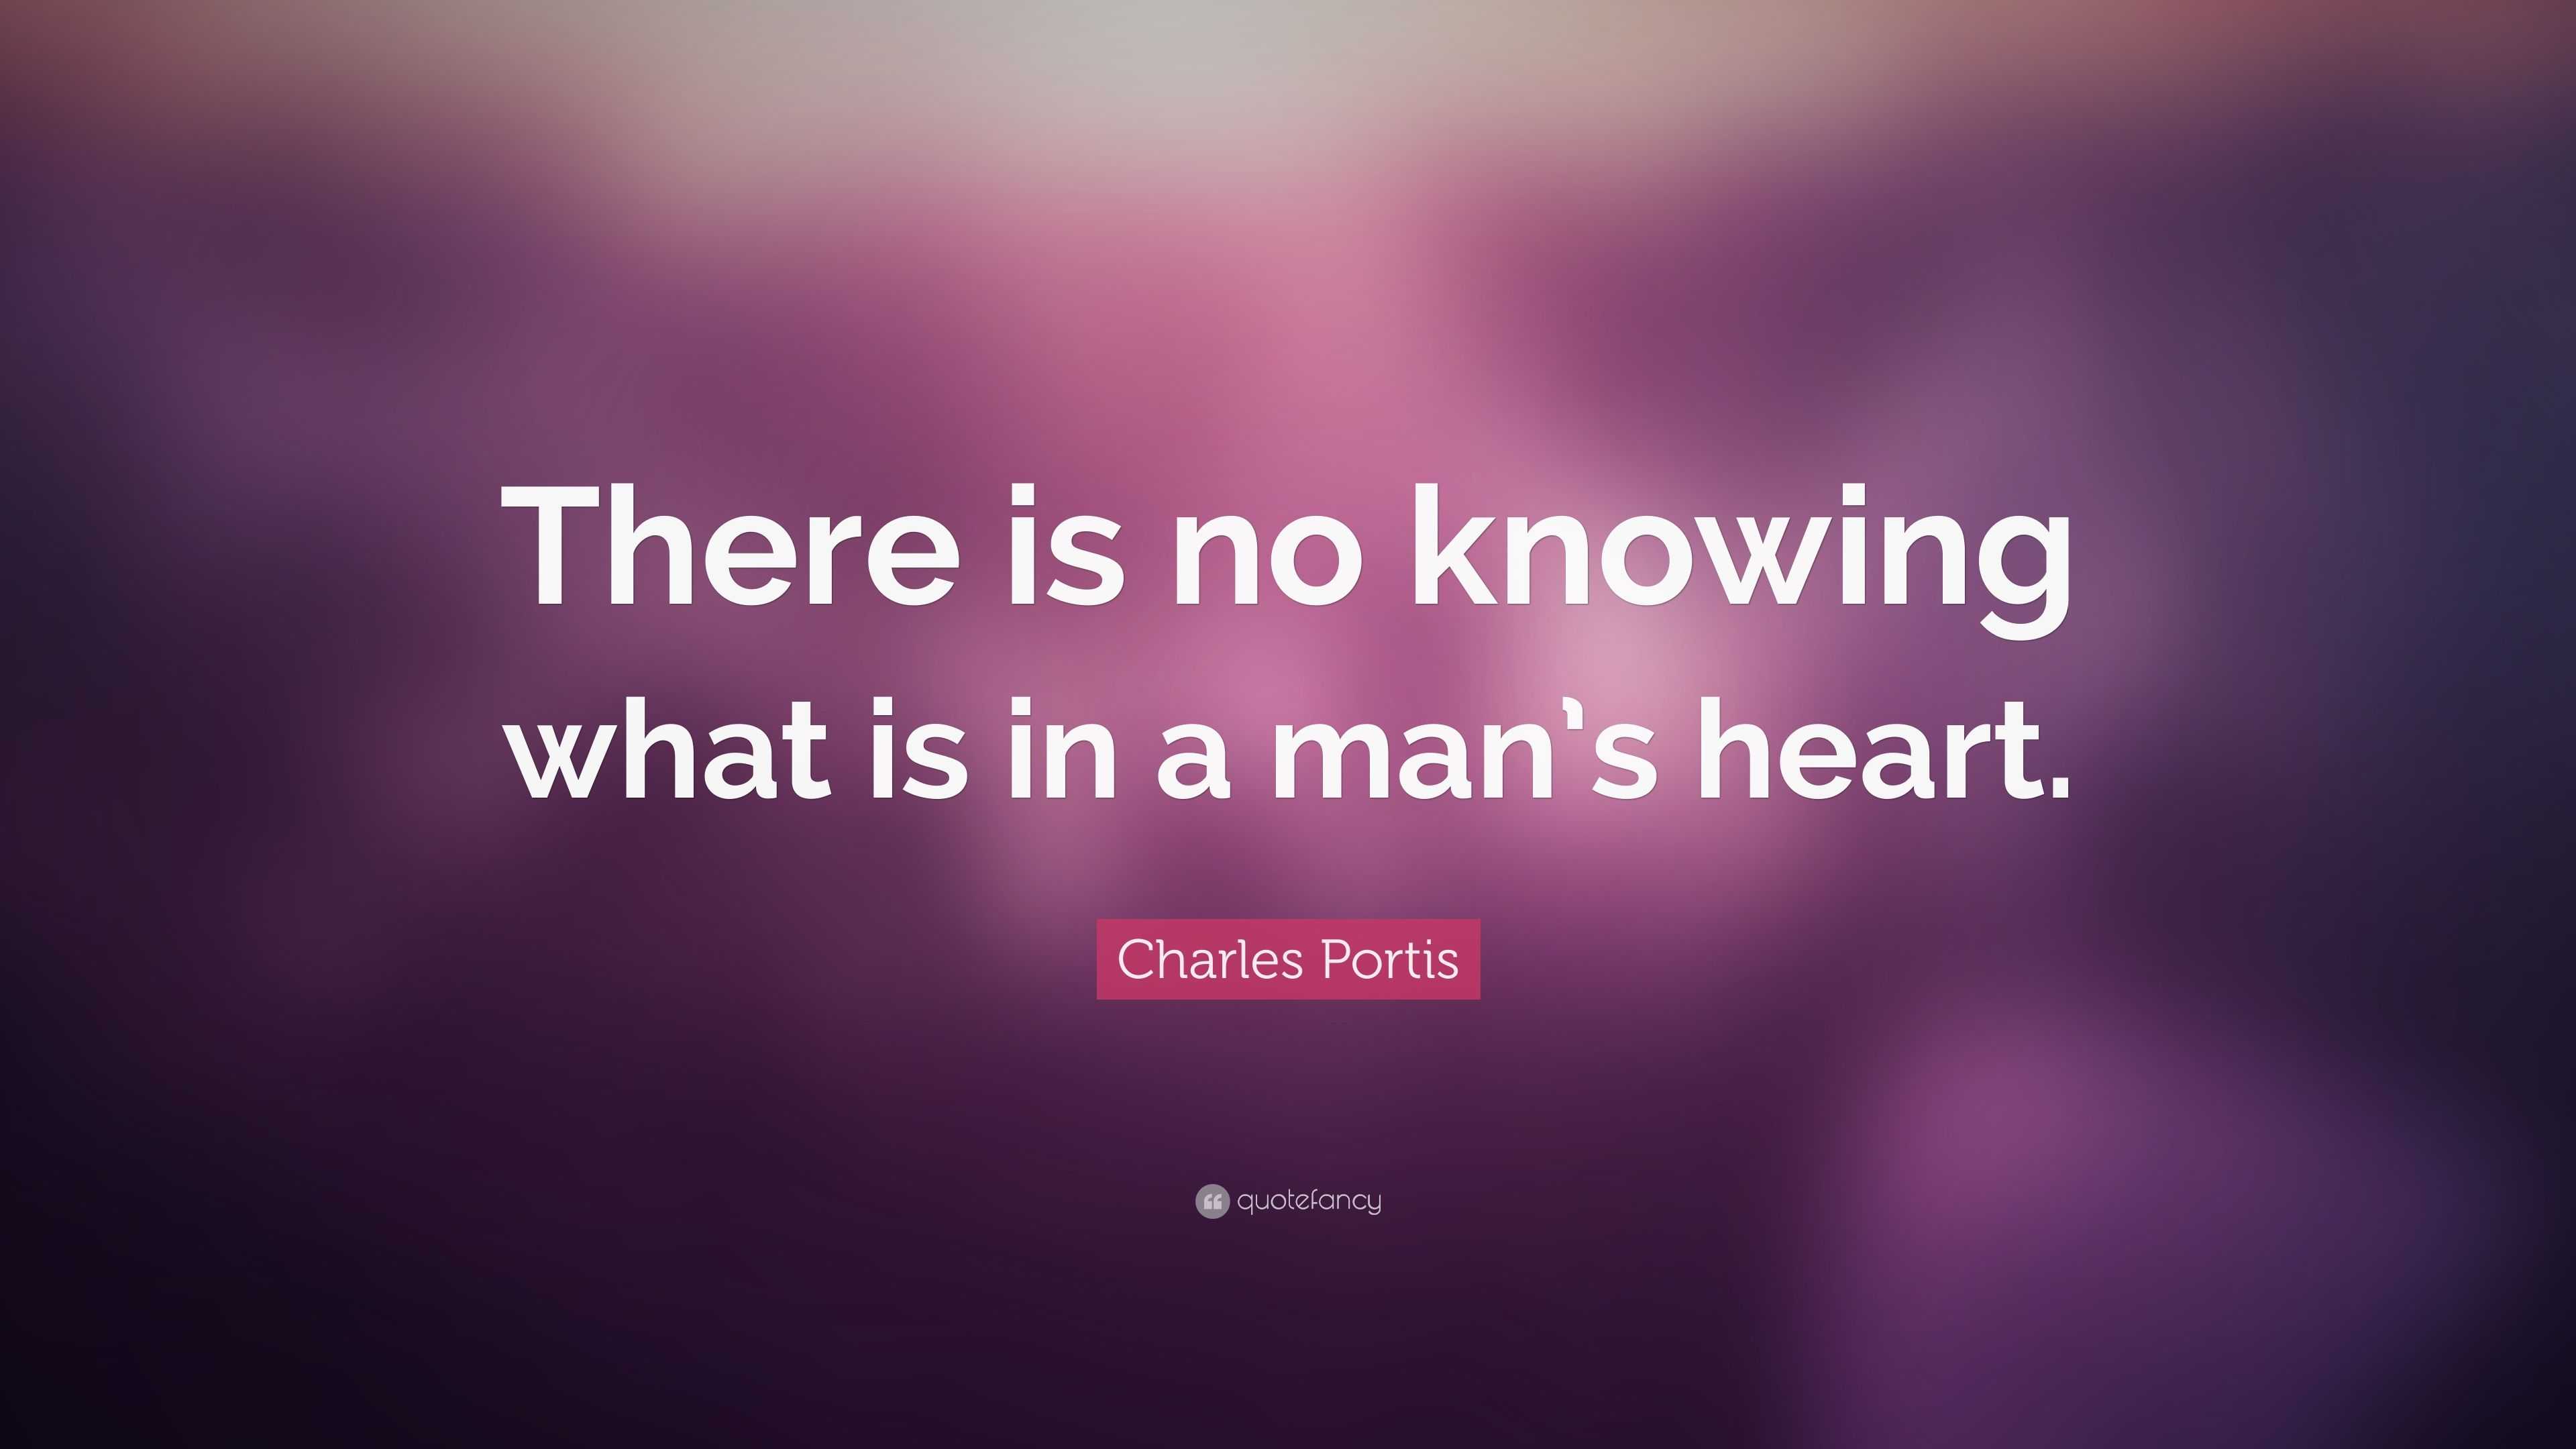 Charles Portis Quote: “There is no knowing what is in a man’s heart.”